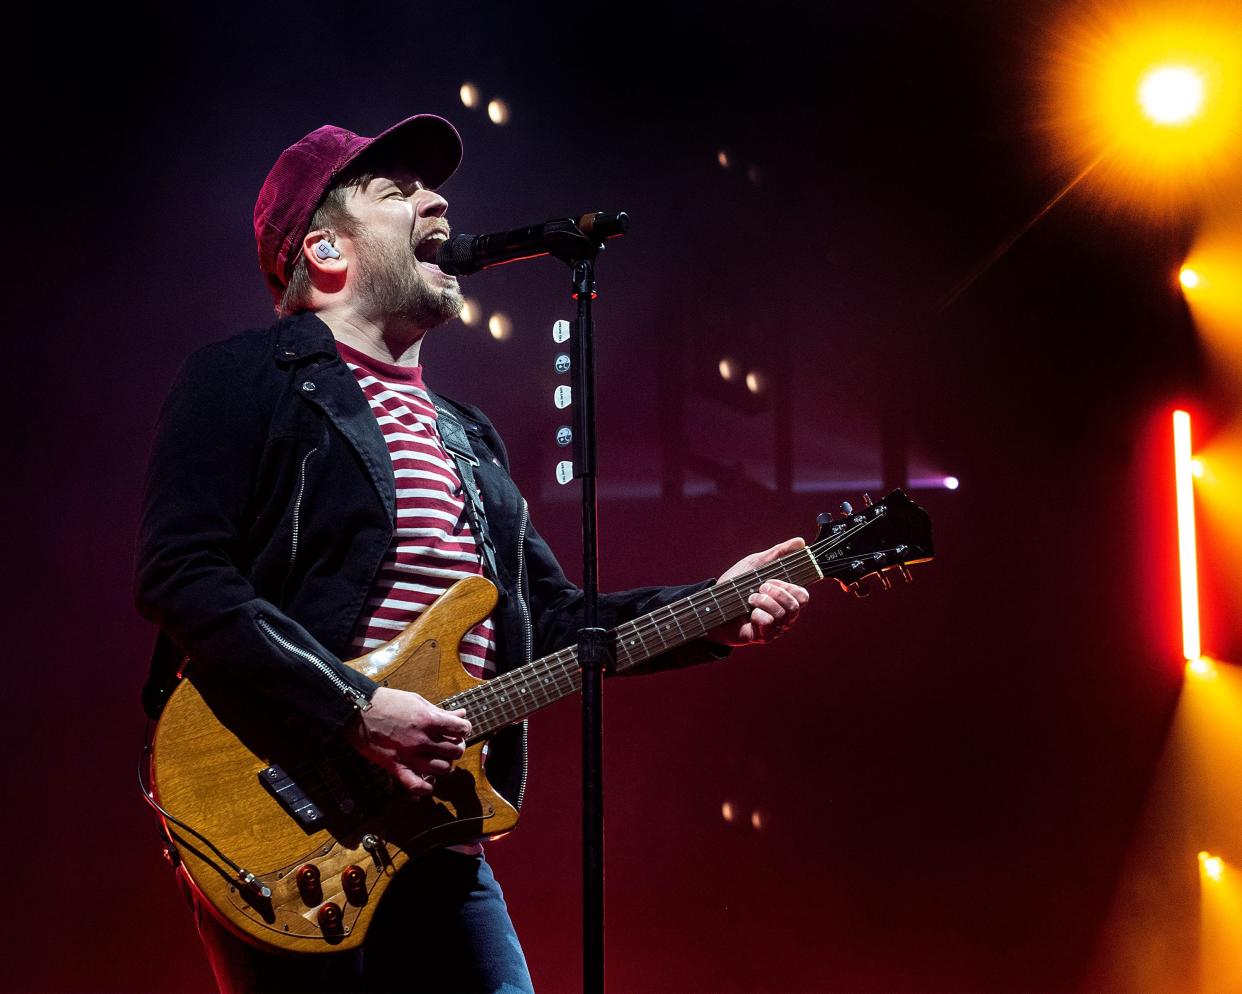 Patrick Stump on lead vocals at the Fall Out Boy show.